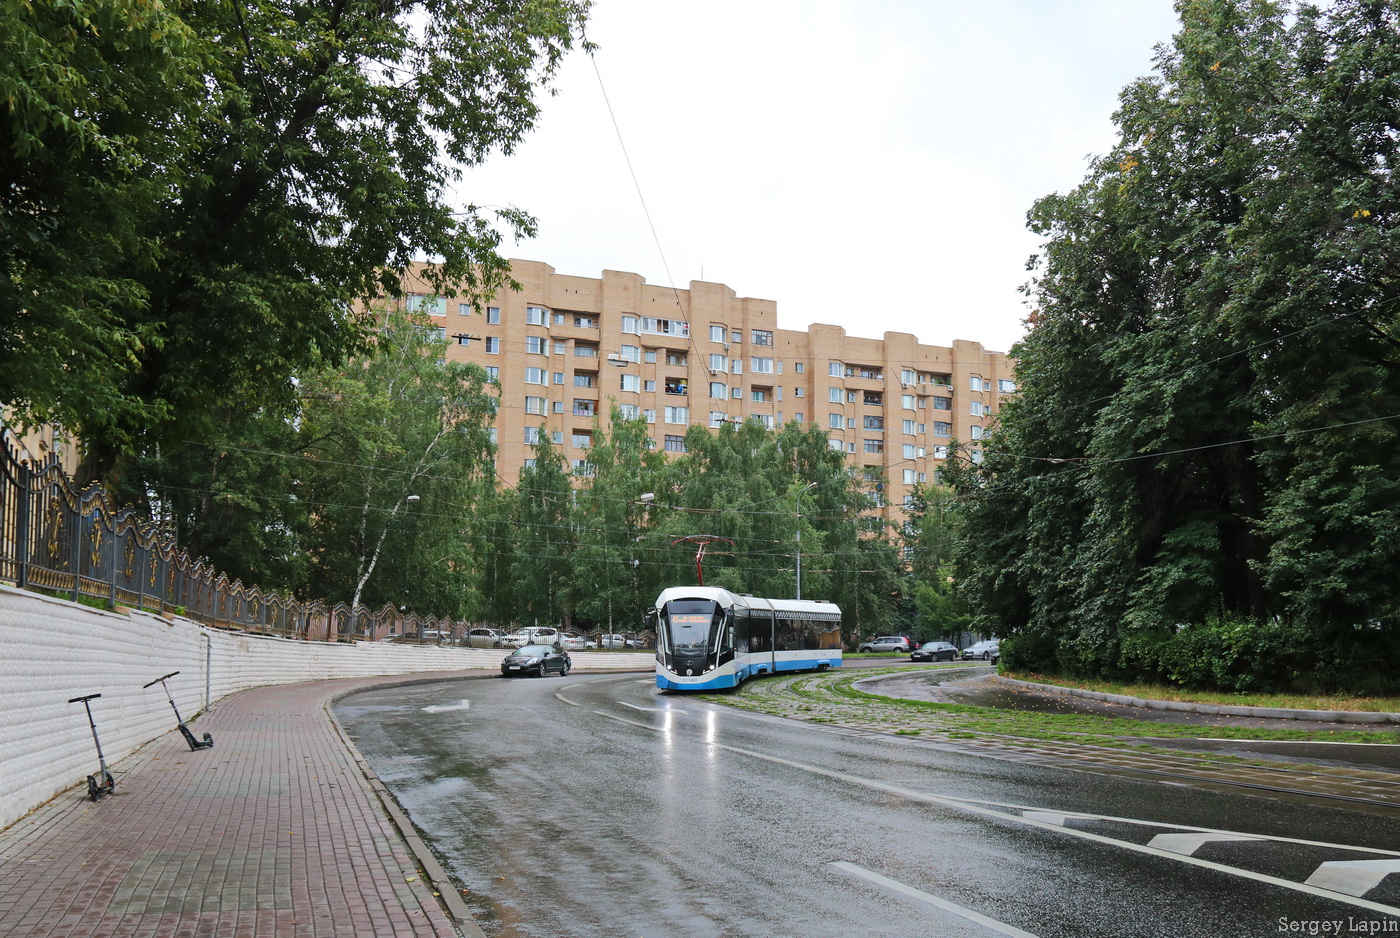 Moskwa — Tram lines: South-Eastern Administrative District